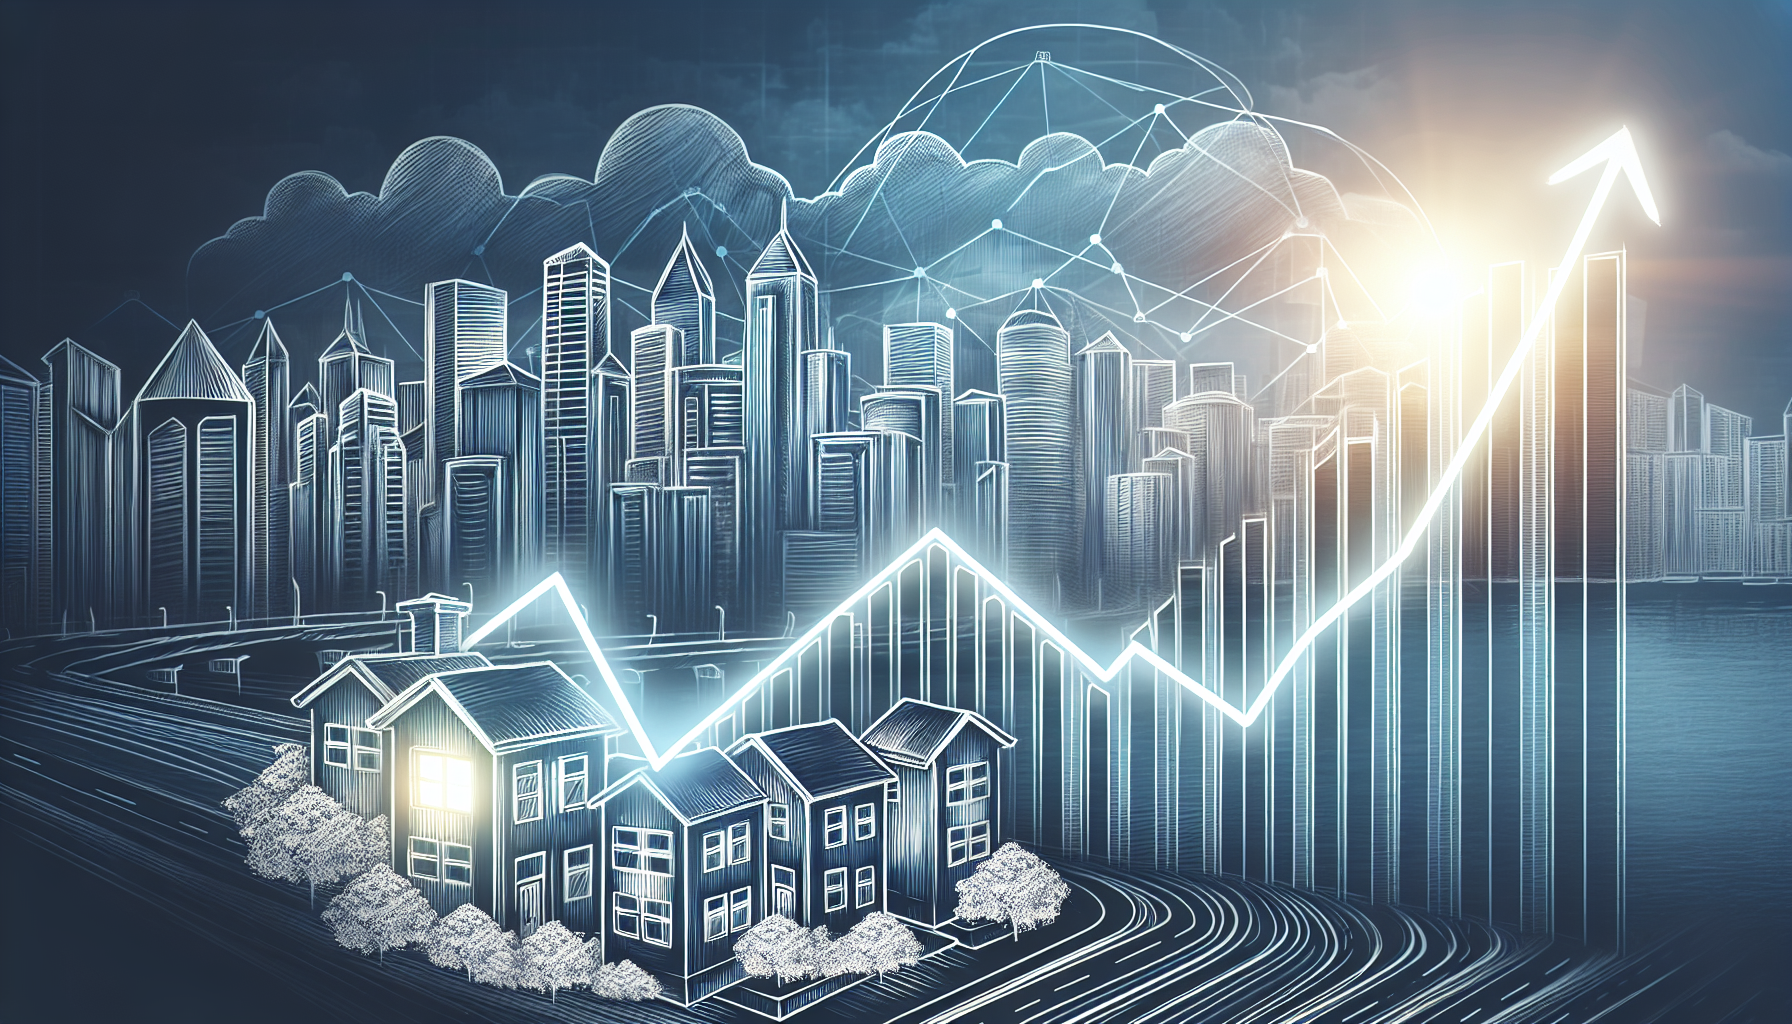 Skyrocketing Real Estate Prices Over the Last Five Years: A Closer Look at the Housing Market Trends